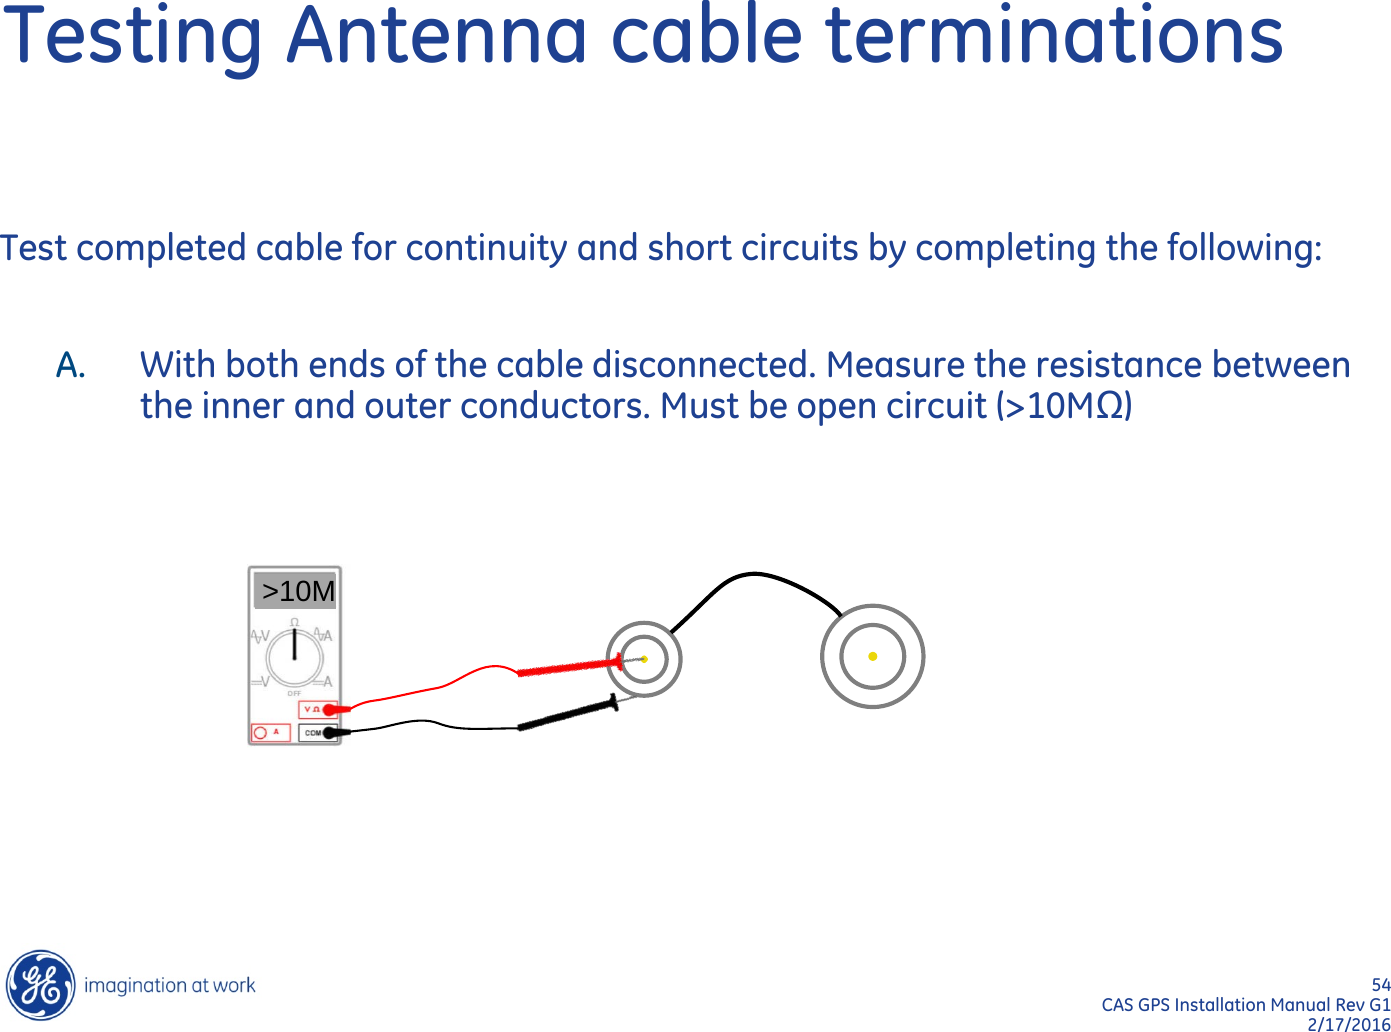 54  CAS GPS Installation Manual Rev G1 2/17/2016 Testing Antenna cable terminations Test completed cable for continuity and short circuits by completing the following:  A. With both ends of the cable disconnected. Measure the resistance between the inner and outer conductors. Must be open circuit (&gt;10MΩ)  &gt;10M 